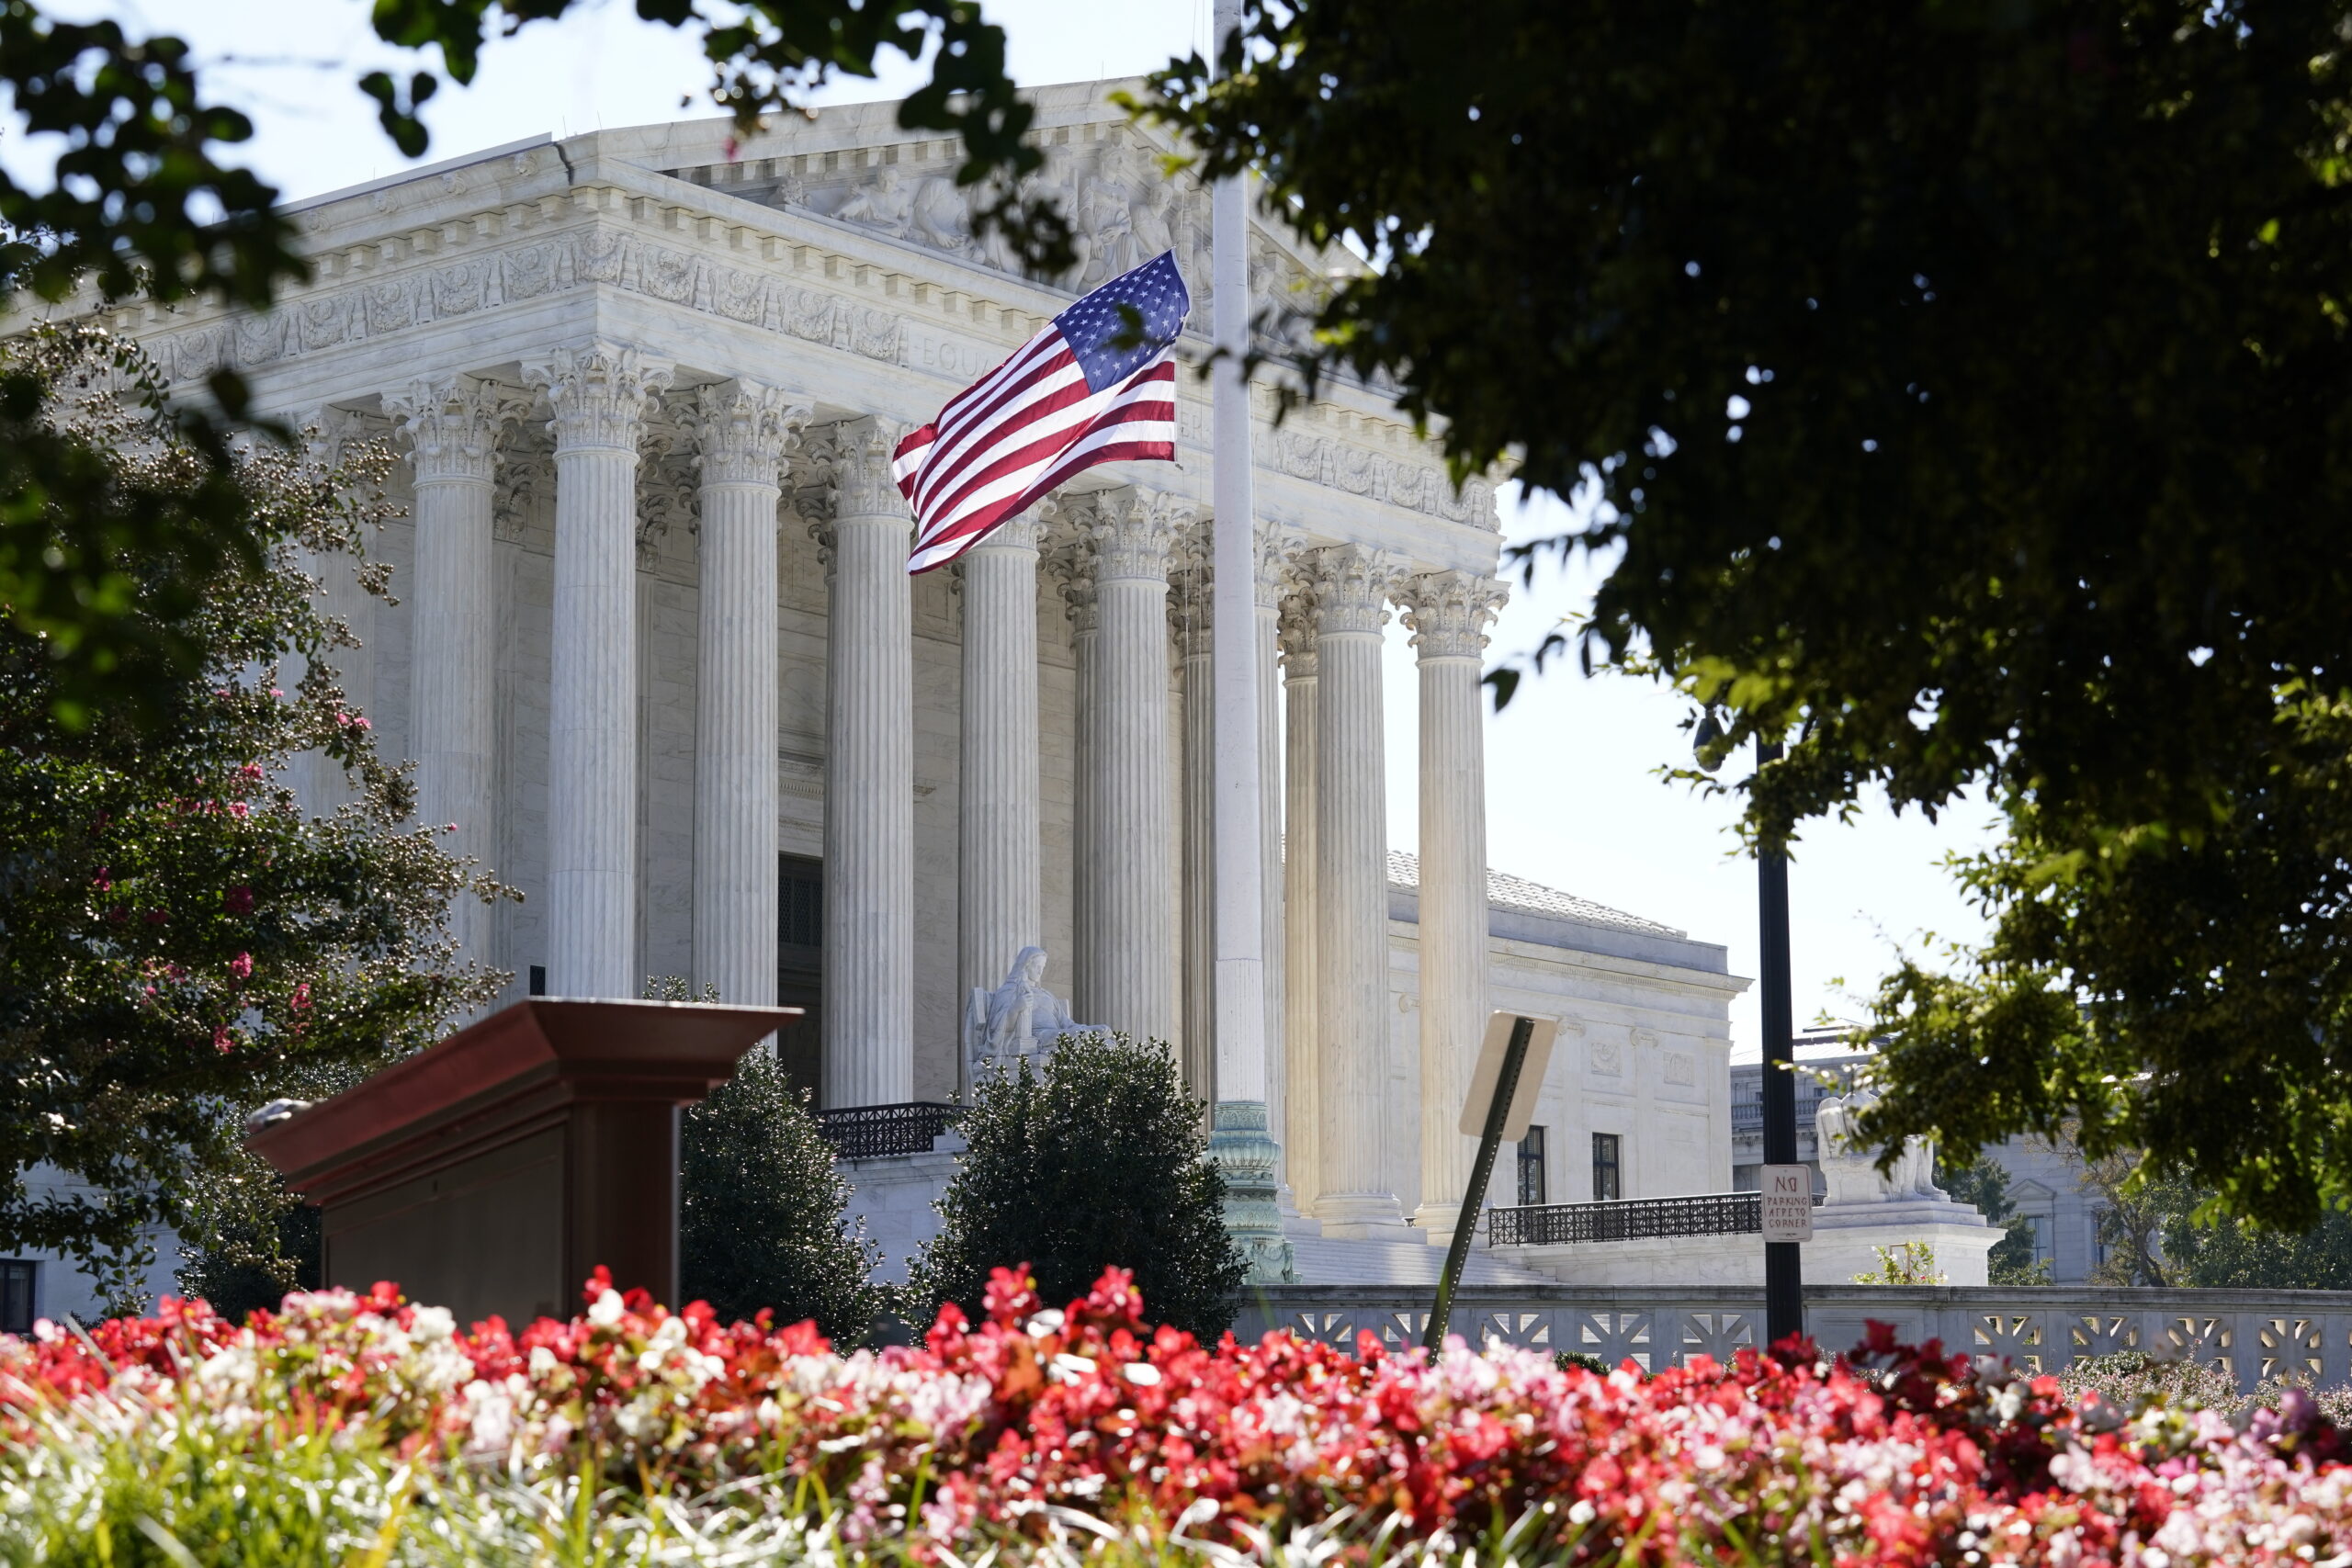 The Supreme Court is seen in Washington, Tuesday, Oct. 6, 2020, as the justices continue arguments in a new term without their colleague, the late Justice Ruth Bader Ginsburg. (AP Photo/J. Scott Applewhite)